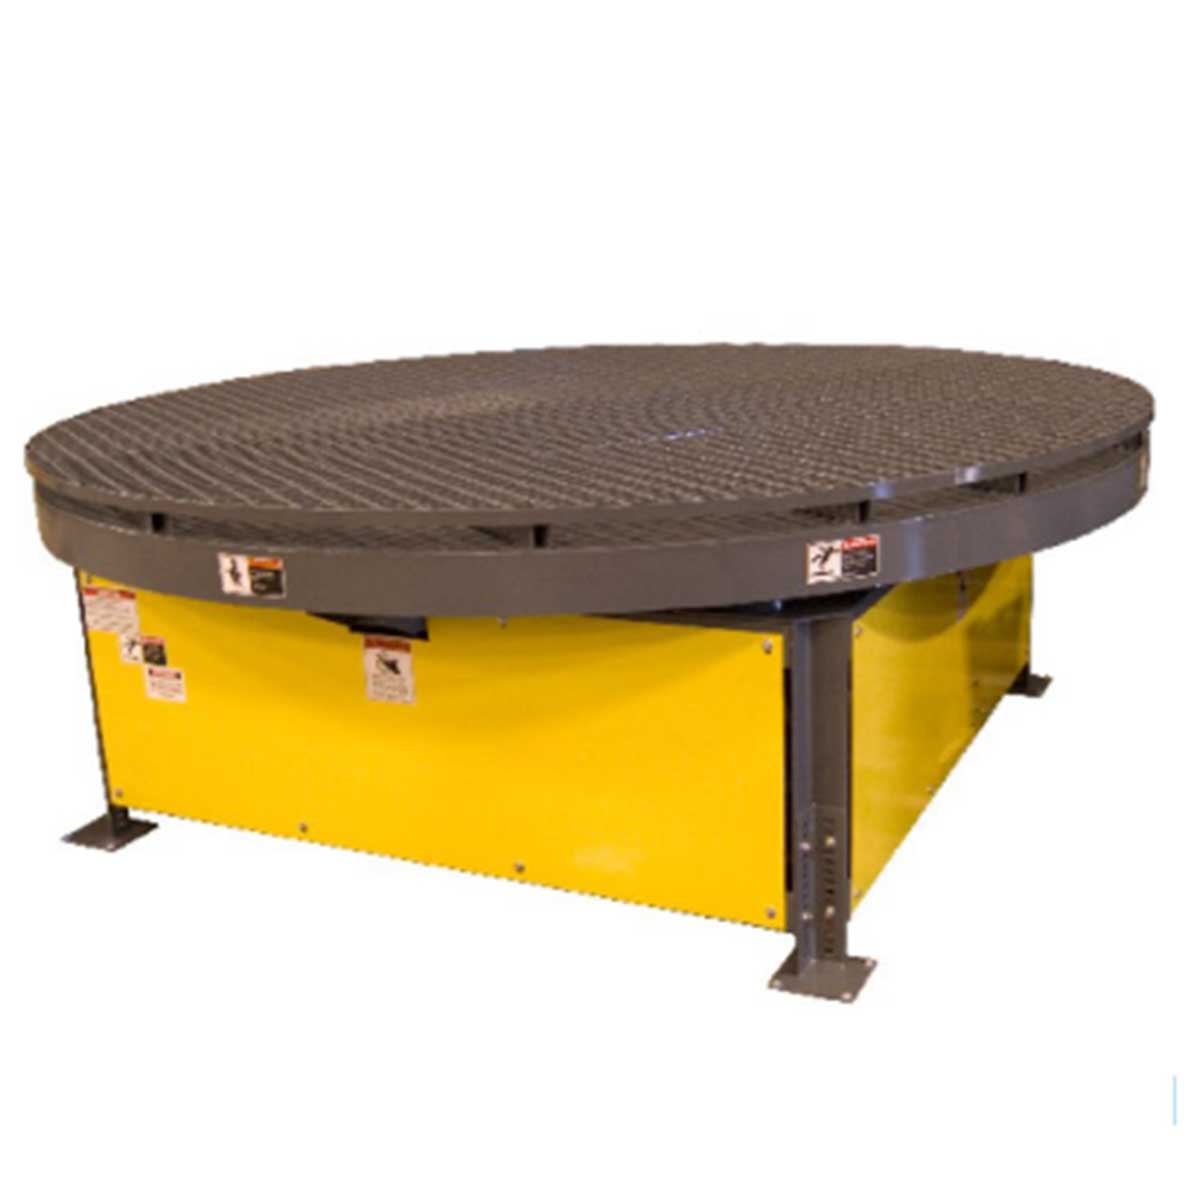 Turn Table Conveyors Manufacturers in Pune